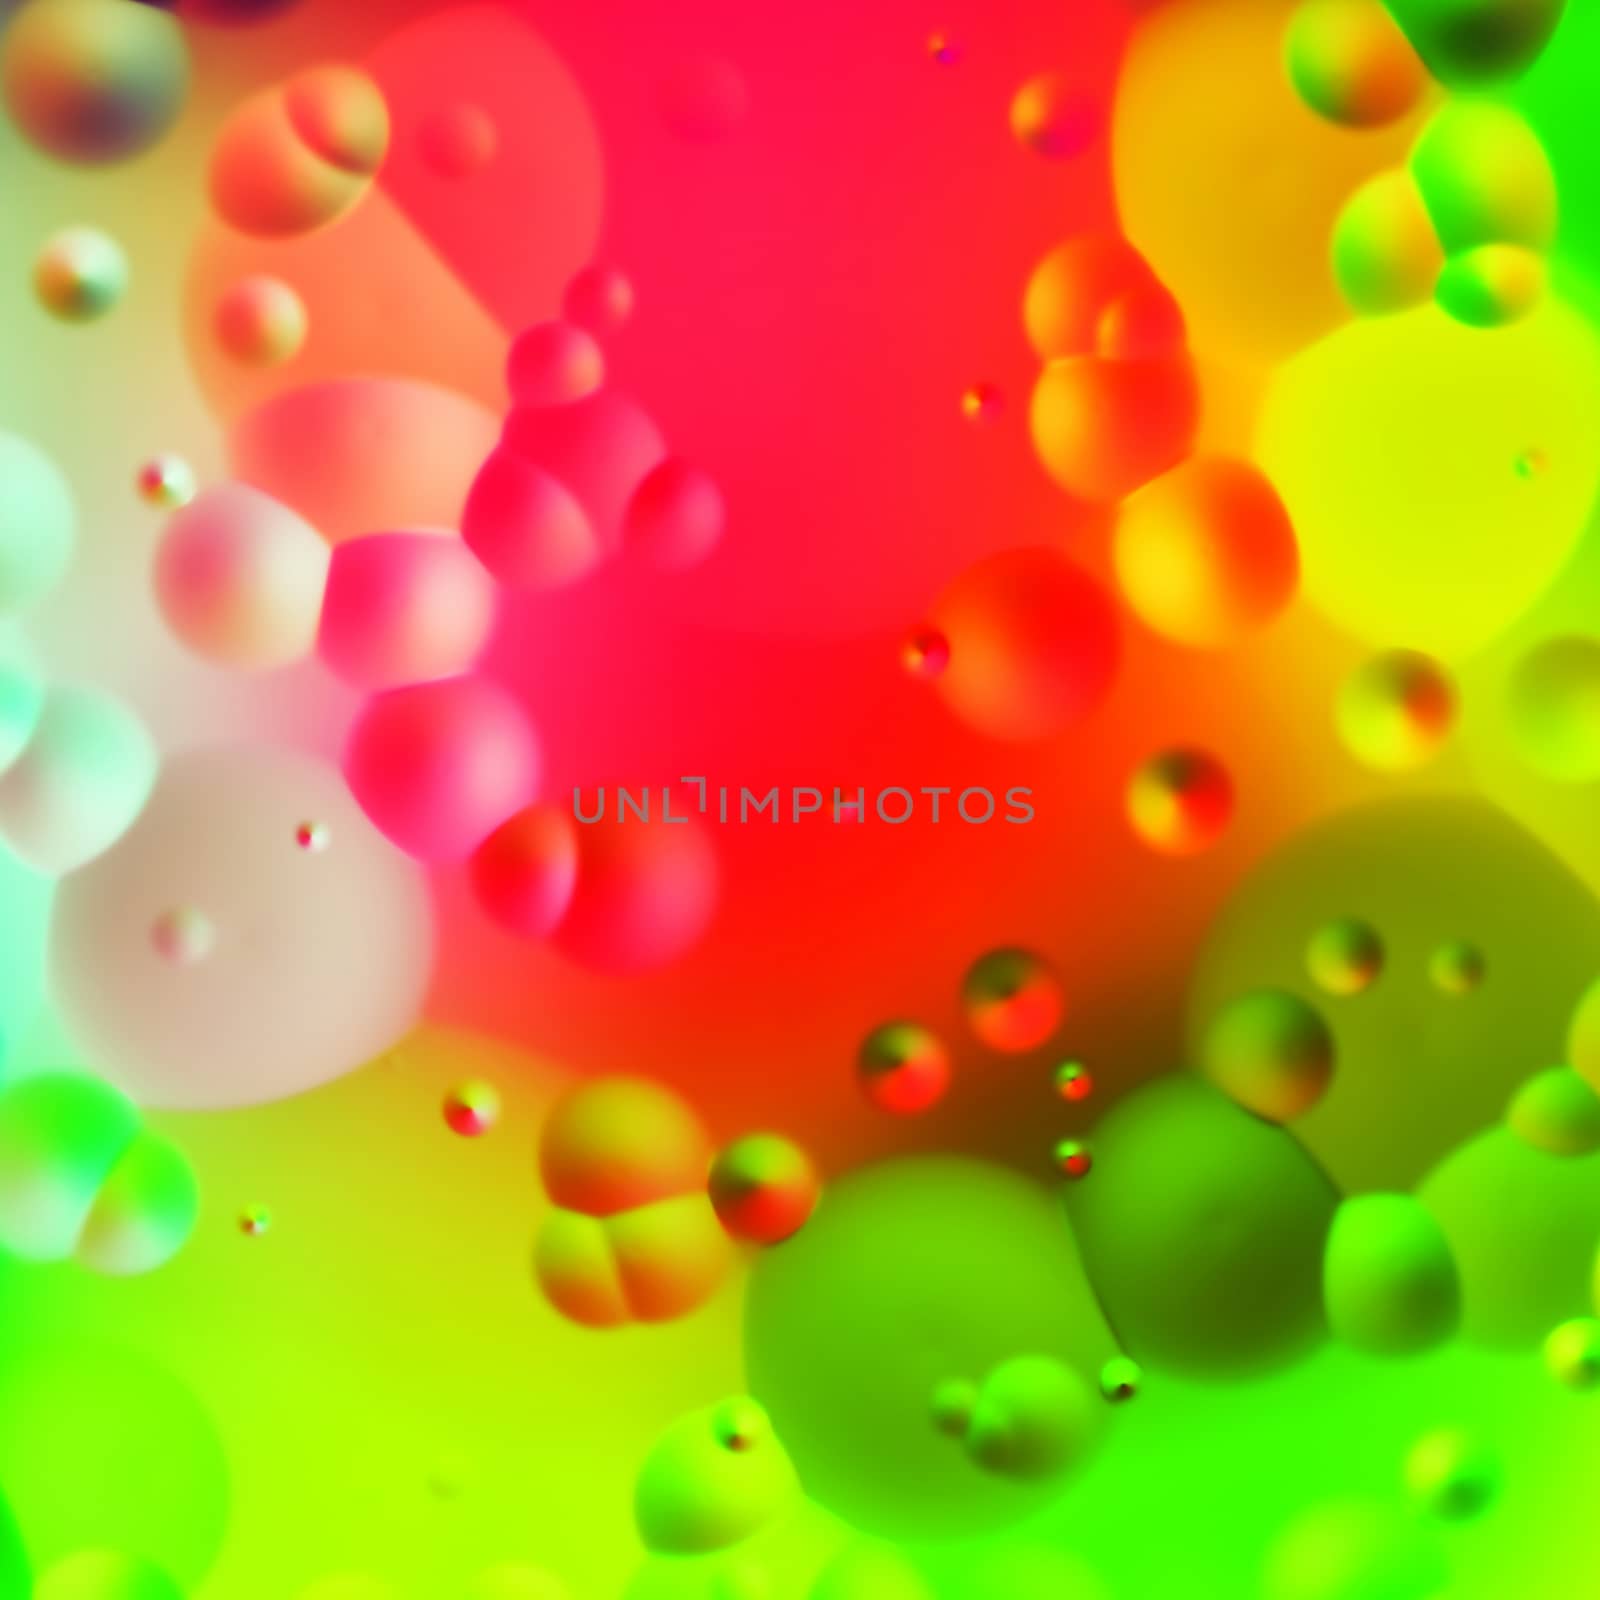 2d illustration of a colorful oil drops background